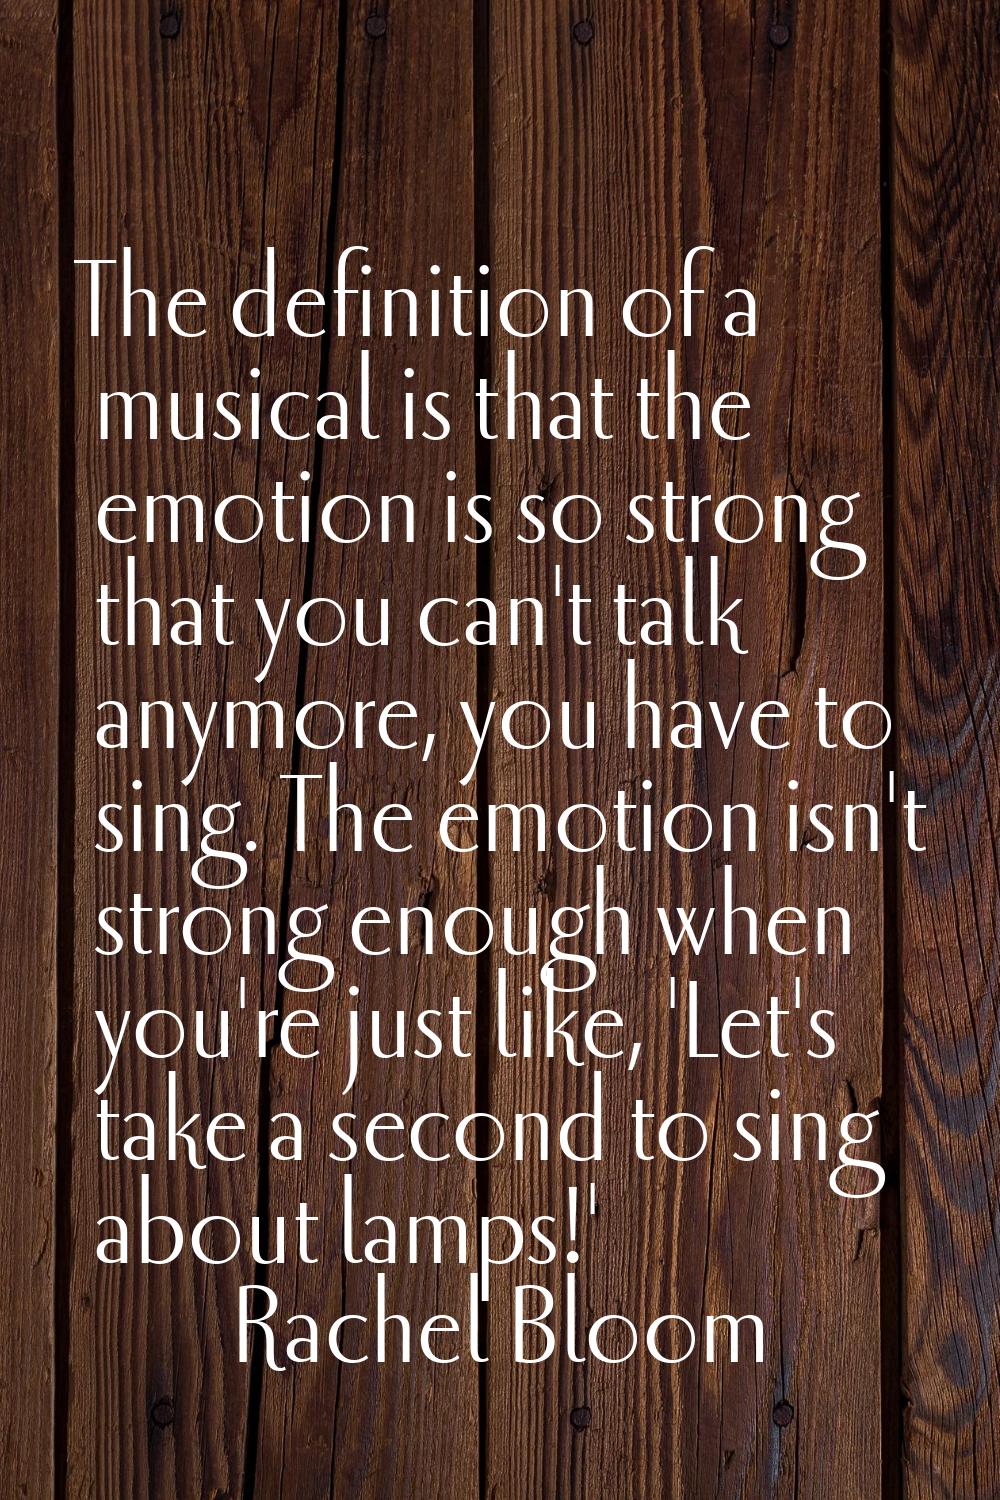 The definition of a musical is that the emotion is so strong that you can't talk anymore, you have 